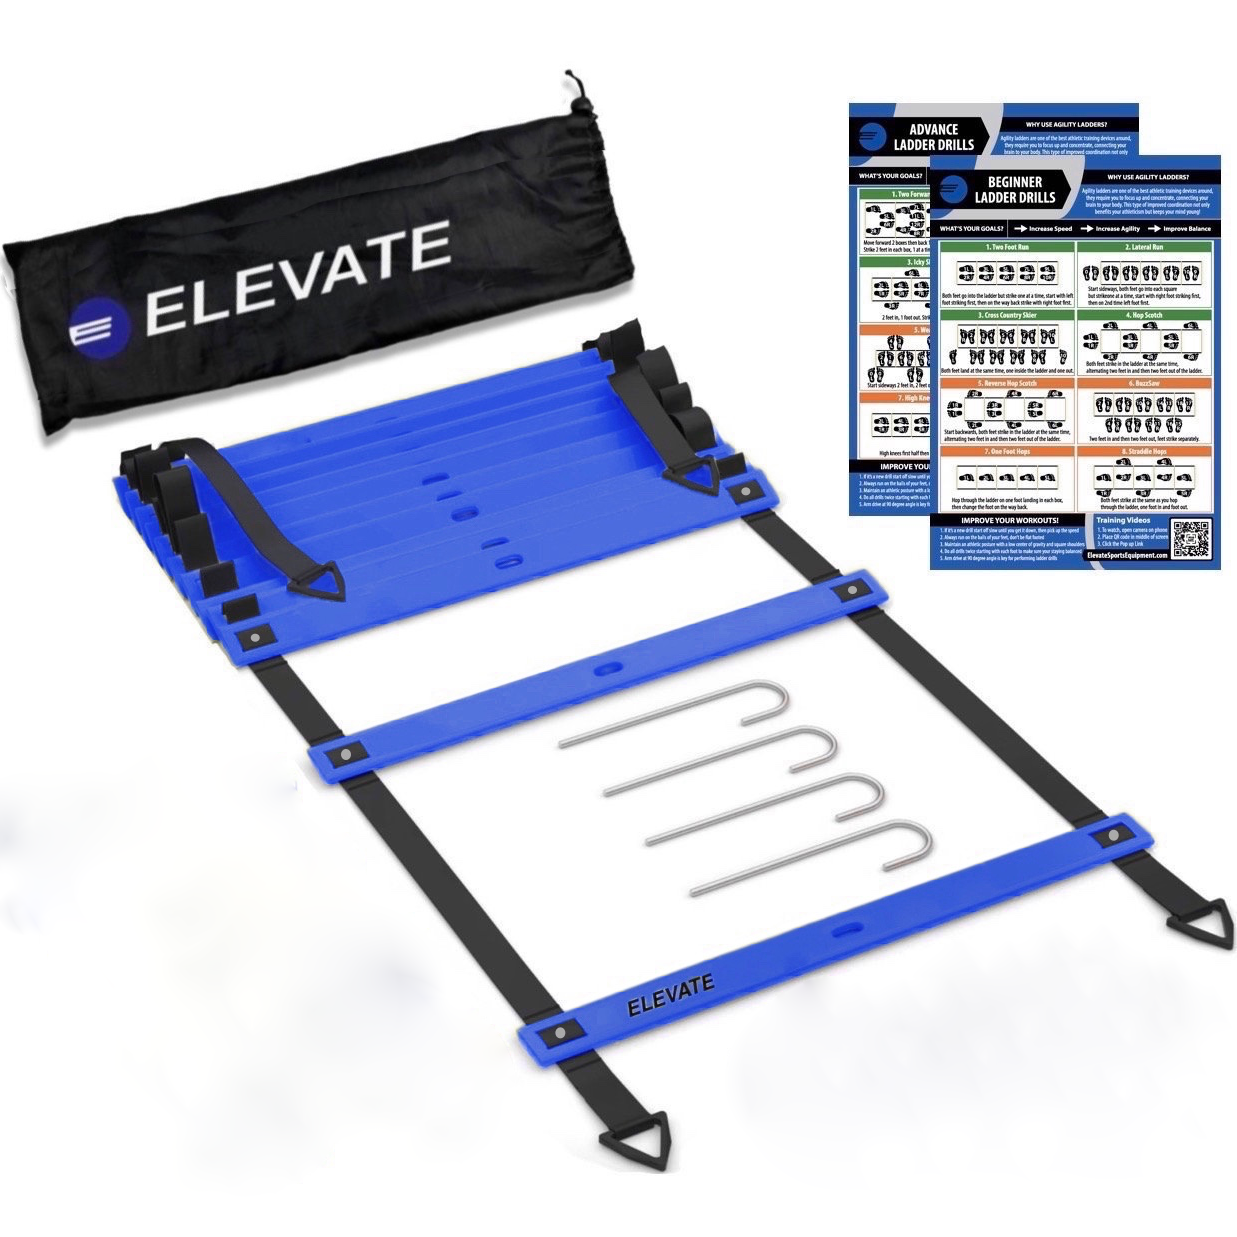 elevate agility ladder with carry bag and drill charts with video training. Easy to use speed ladder for everyone